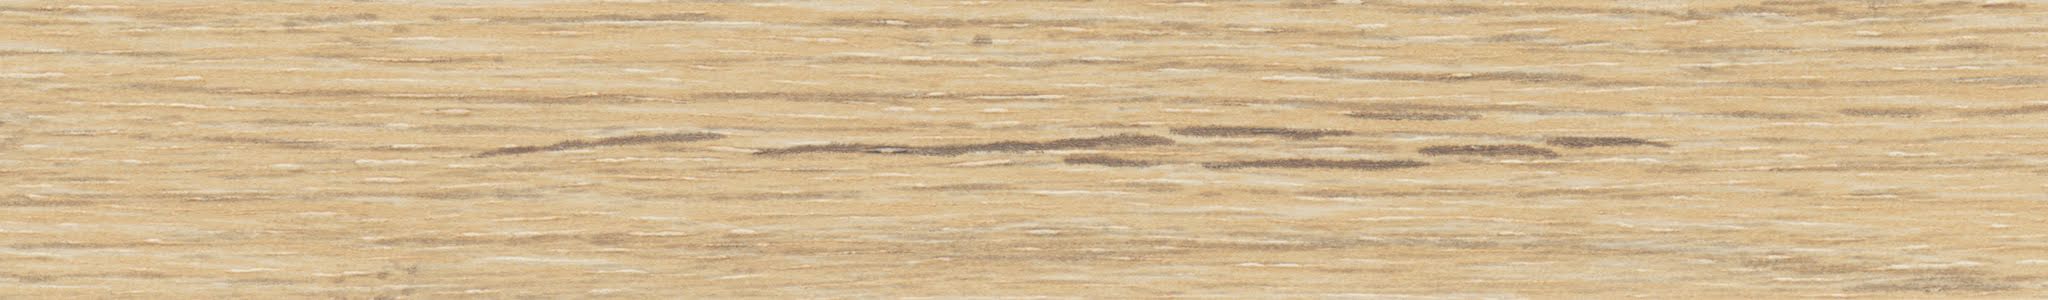 ABS K086 PW Natural Rockford Hickory 42x1mm HD 24086